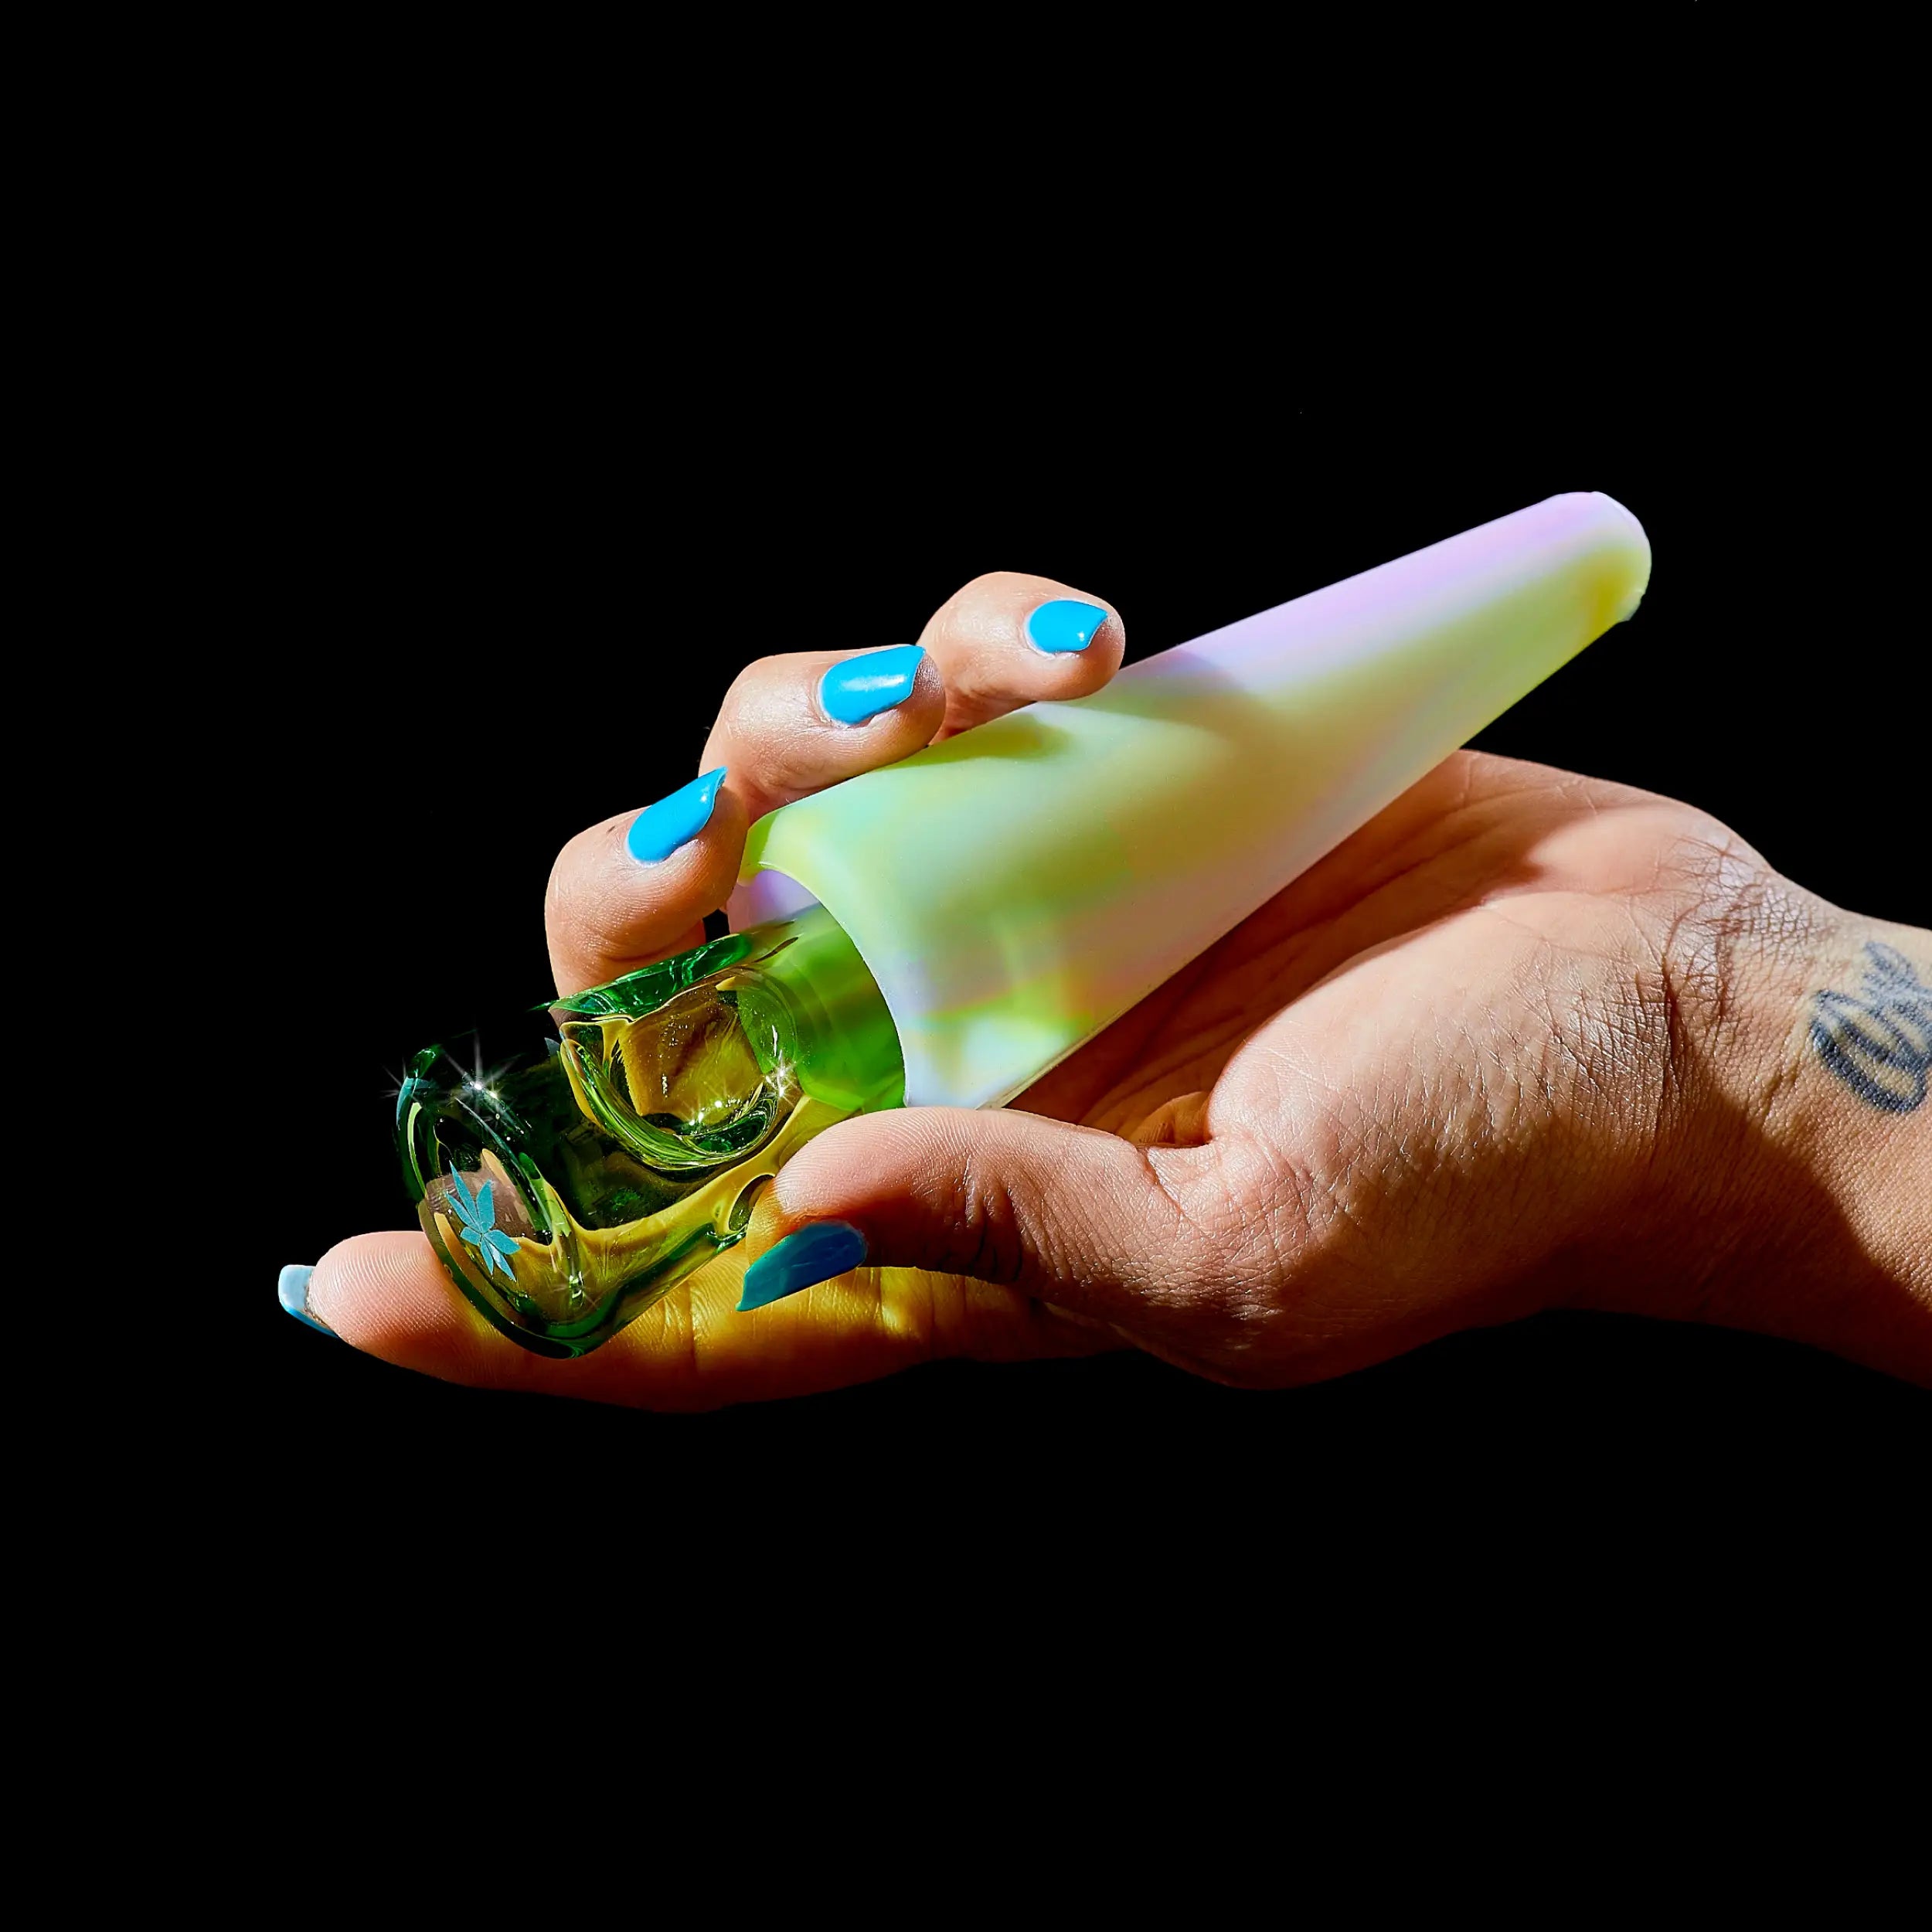 Weed Pipes: Wholesale Cannabis Smoking Pipes for Smoke Shops